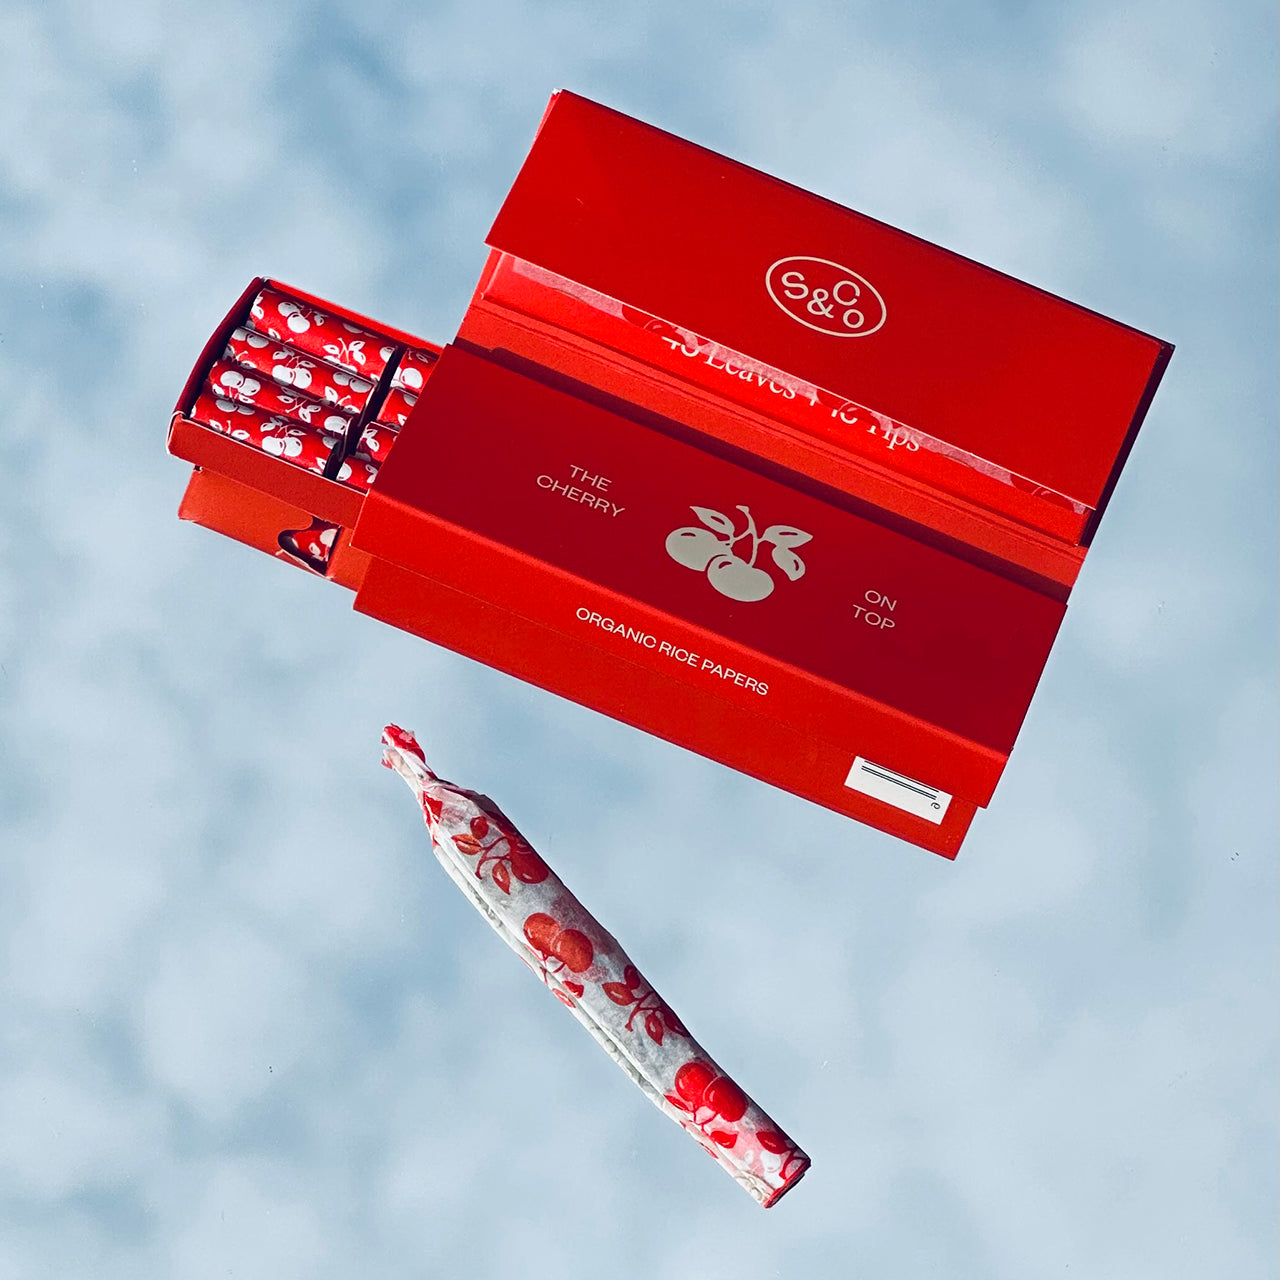 Cherry Red Rolling Papers - 24 Case - Sackville & Co.